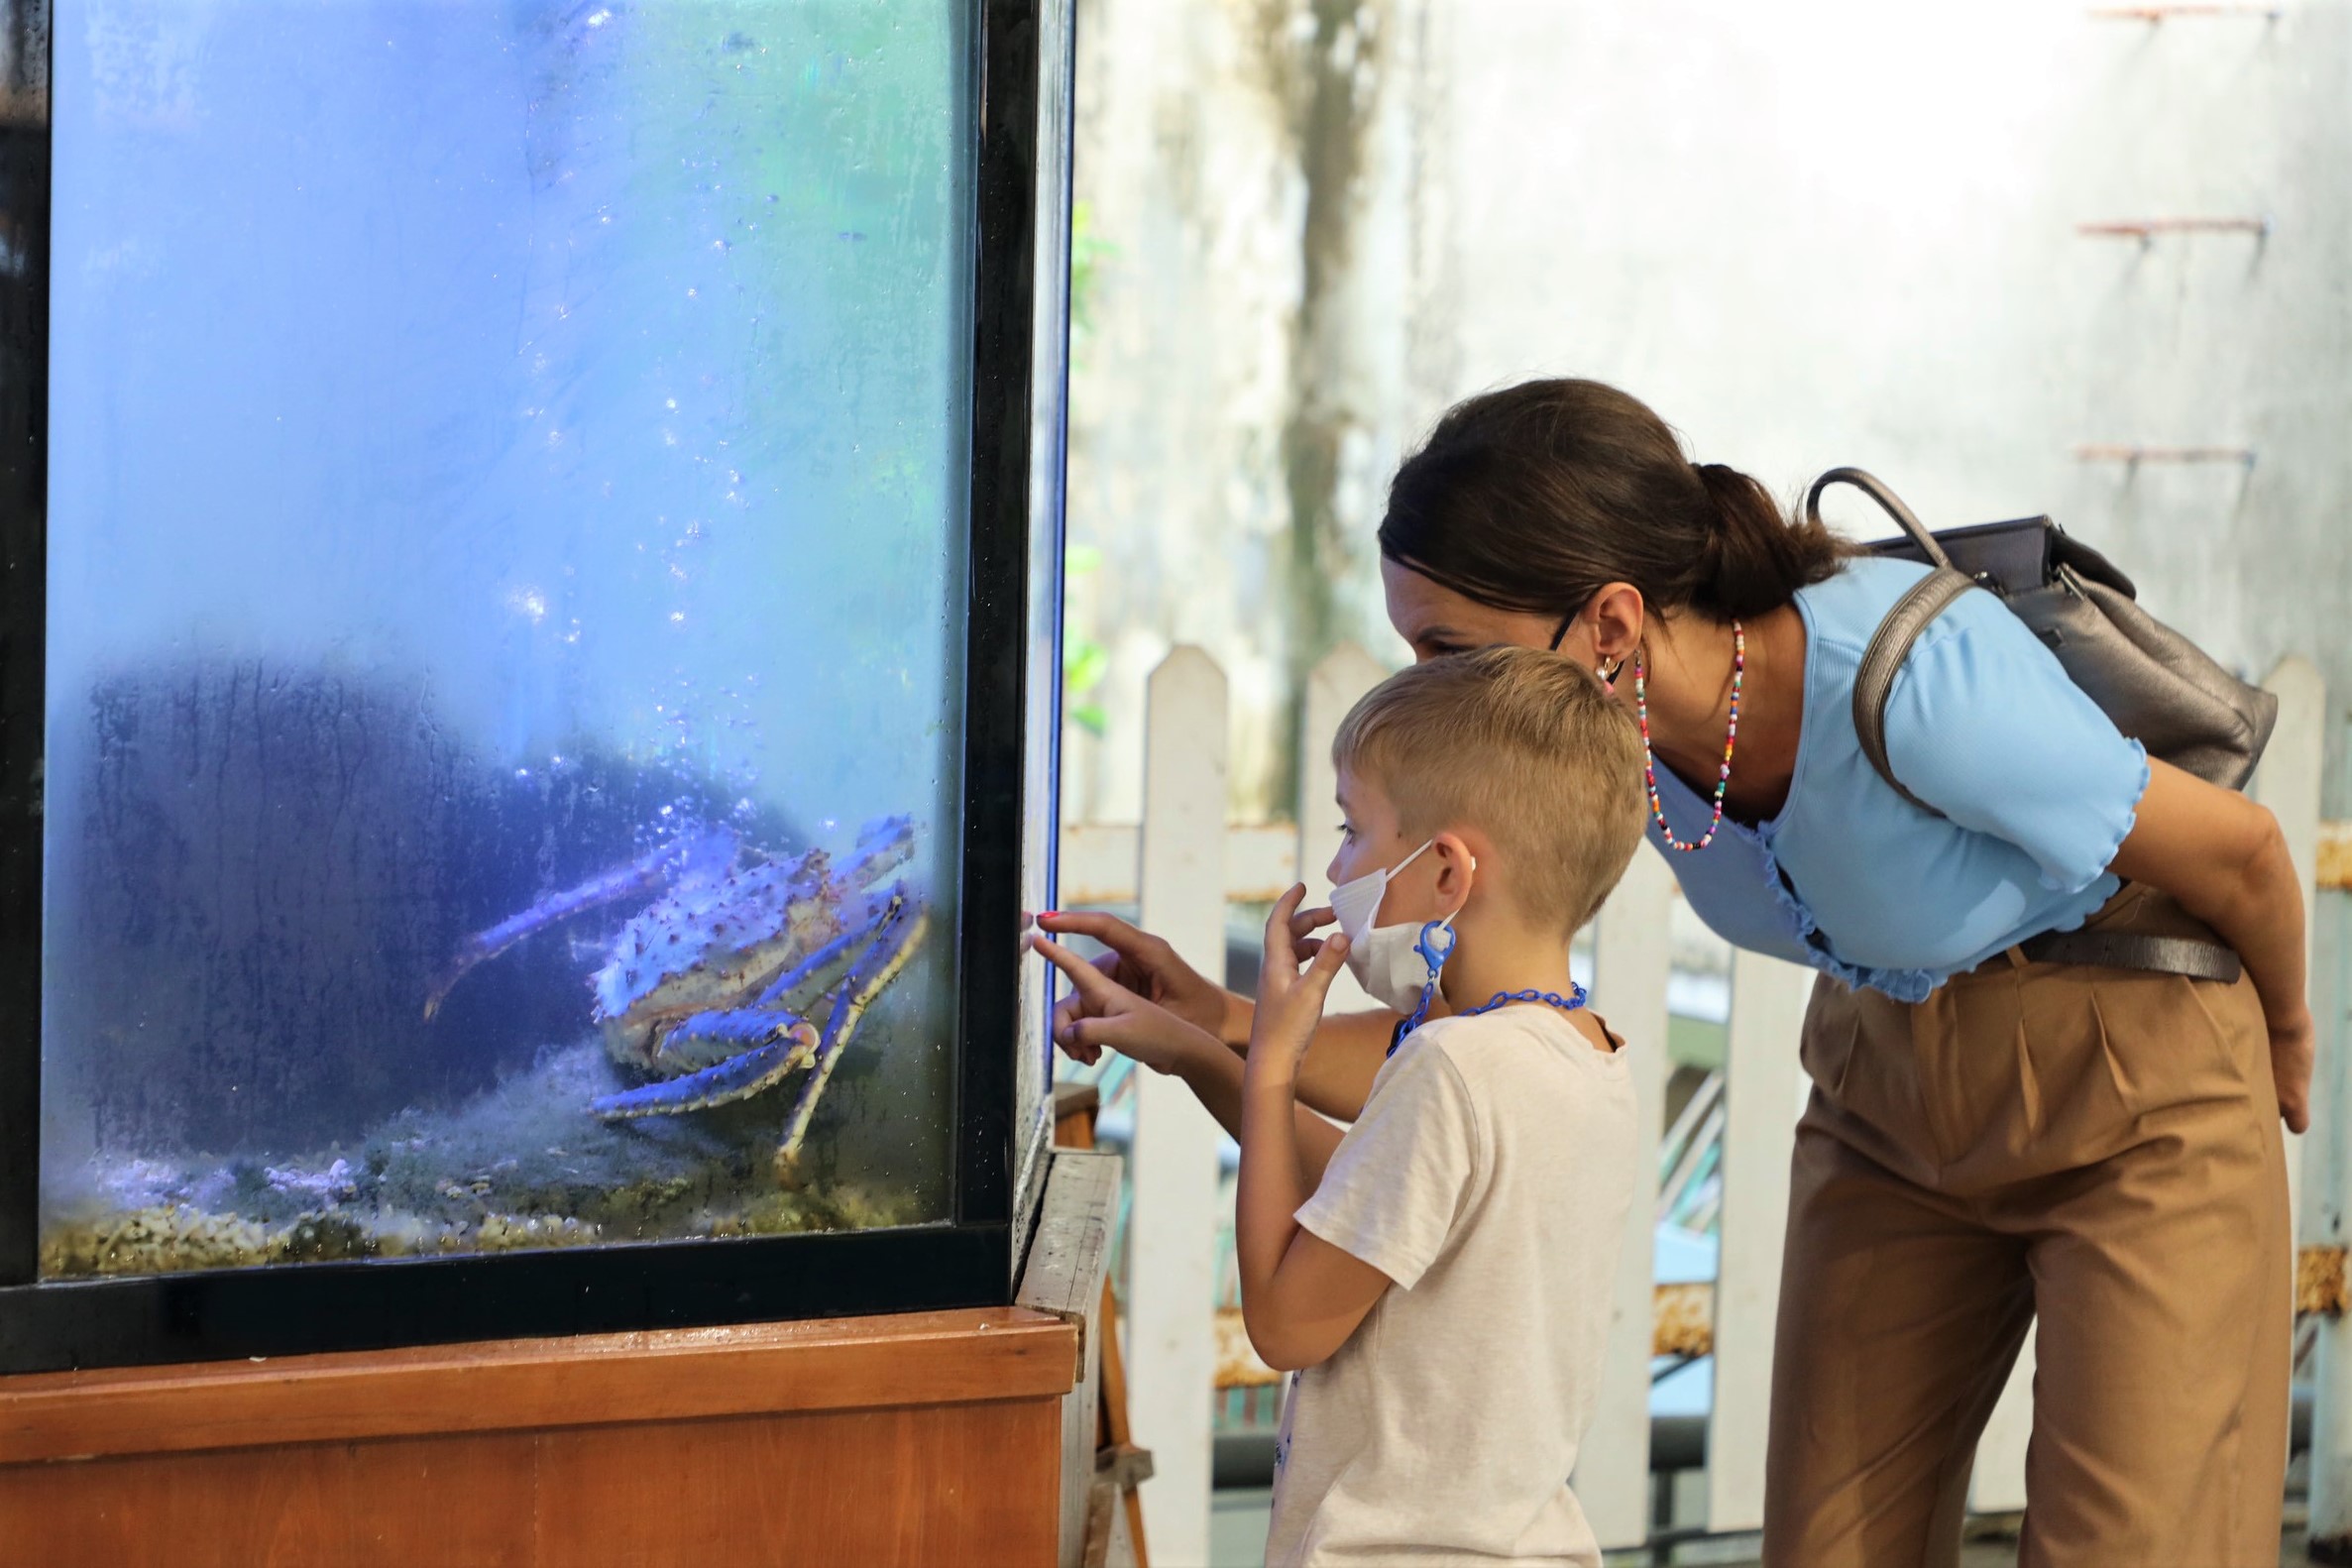 A foreign child and his mother watch a rare purple king crab on display at Nha Trang’s Oceanographic Museum in Khanh Hoa Province, Vietnam. Photo: Nha Trang’s Oceanographic Museum